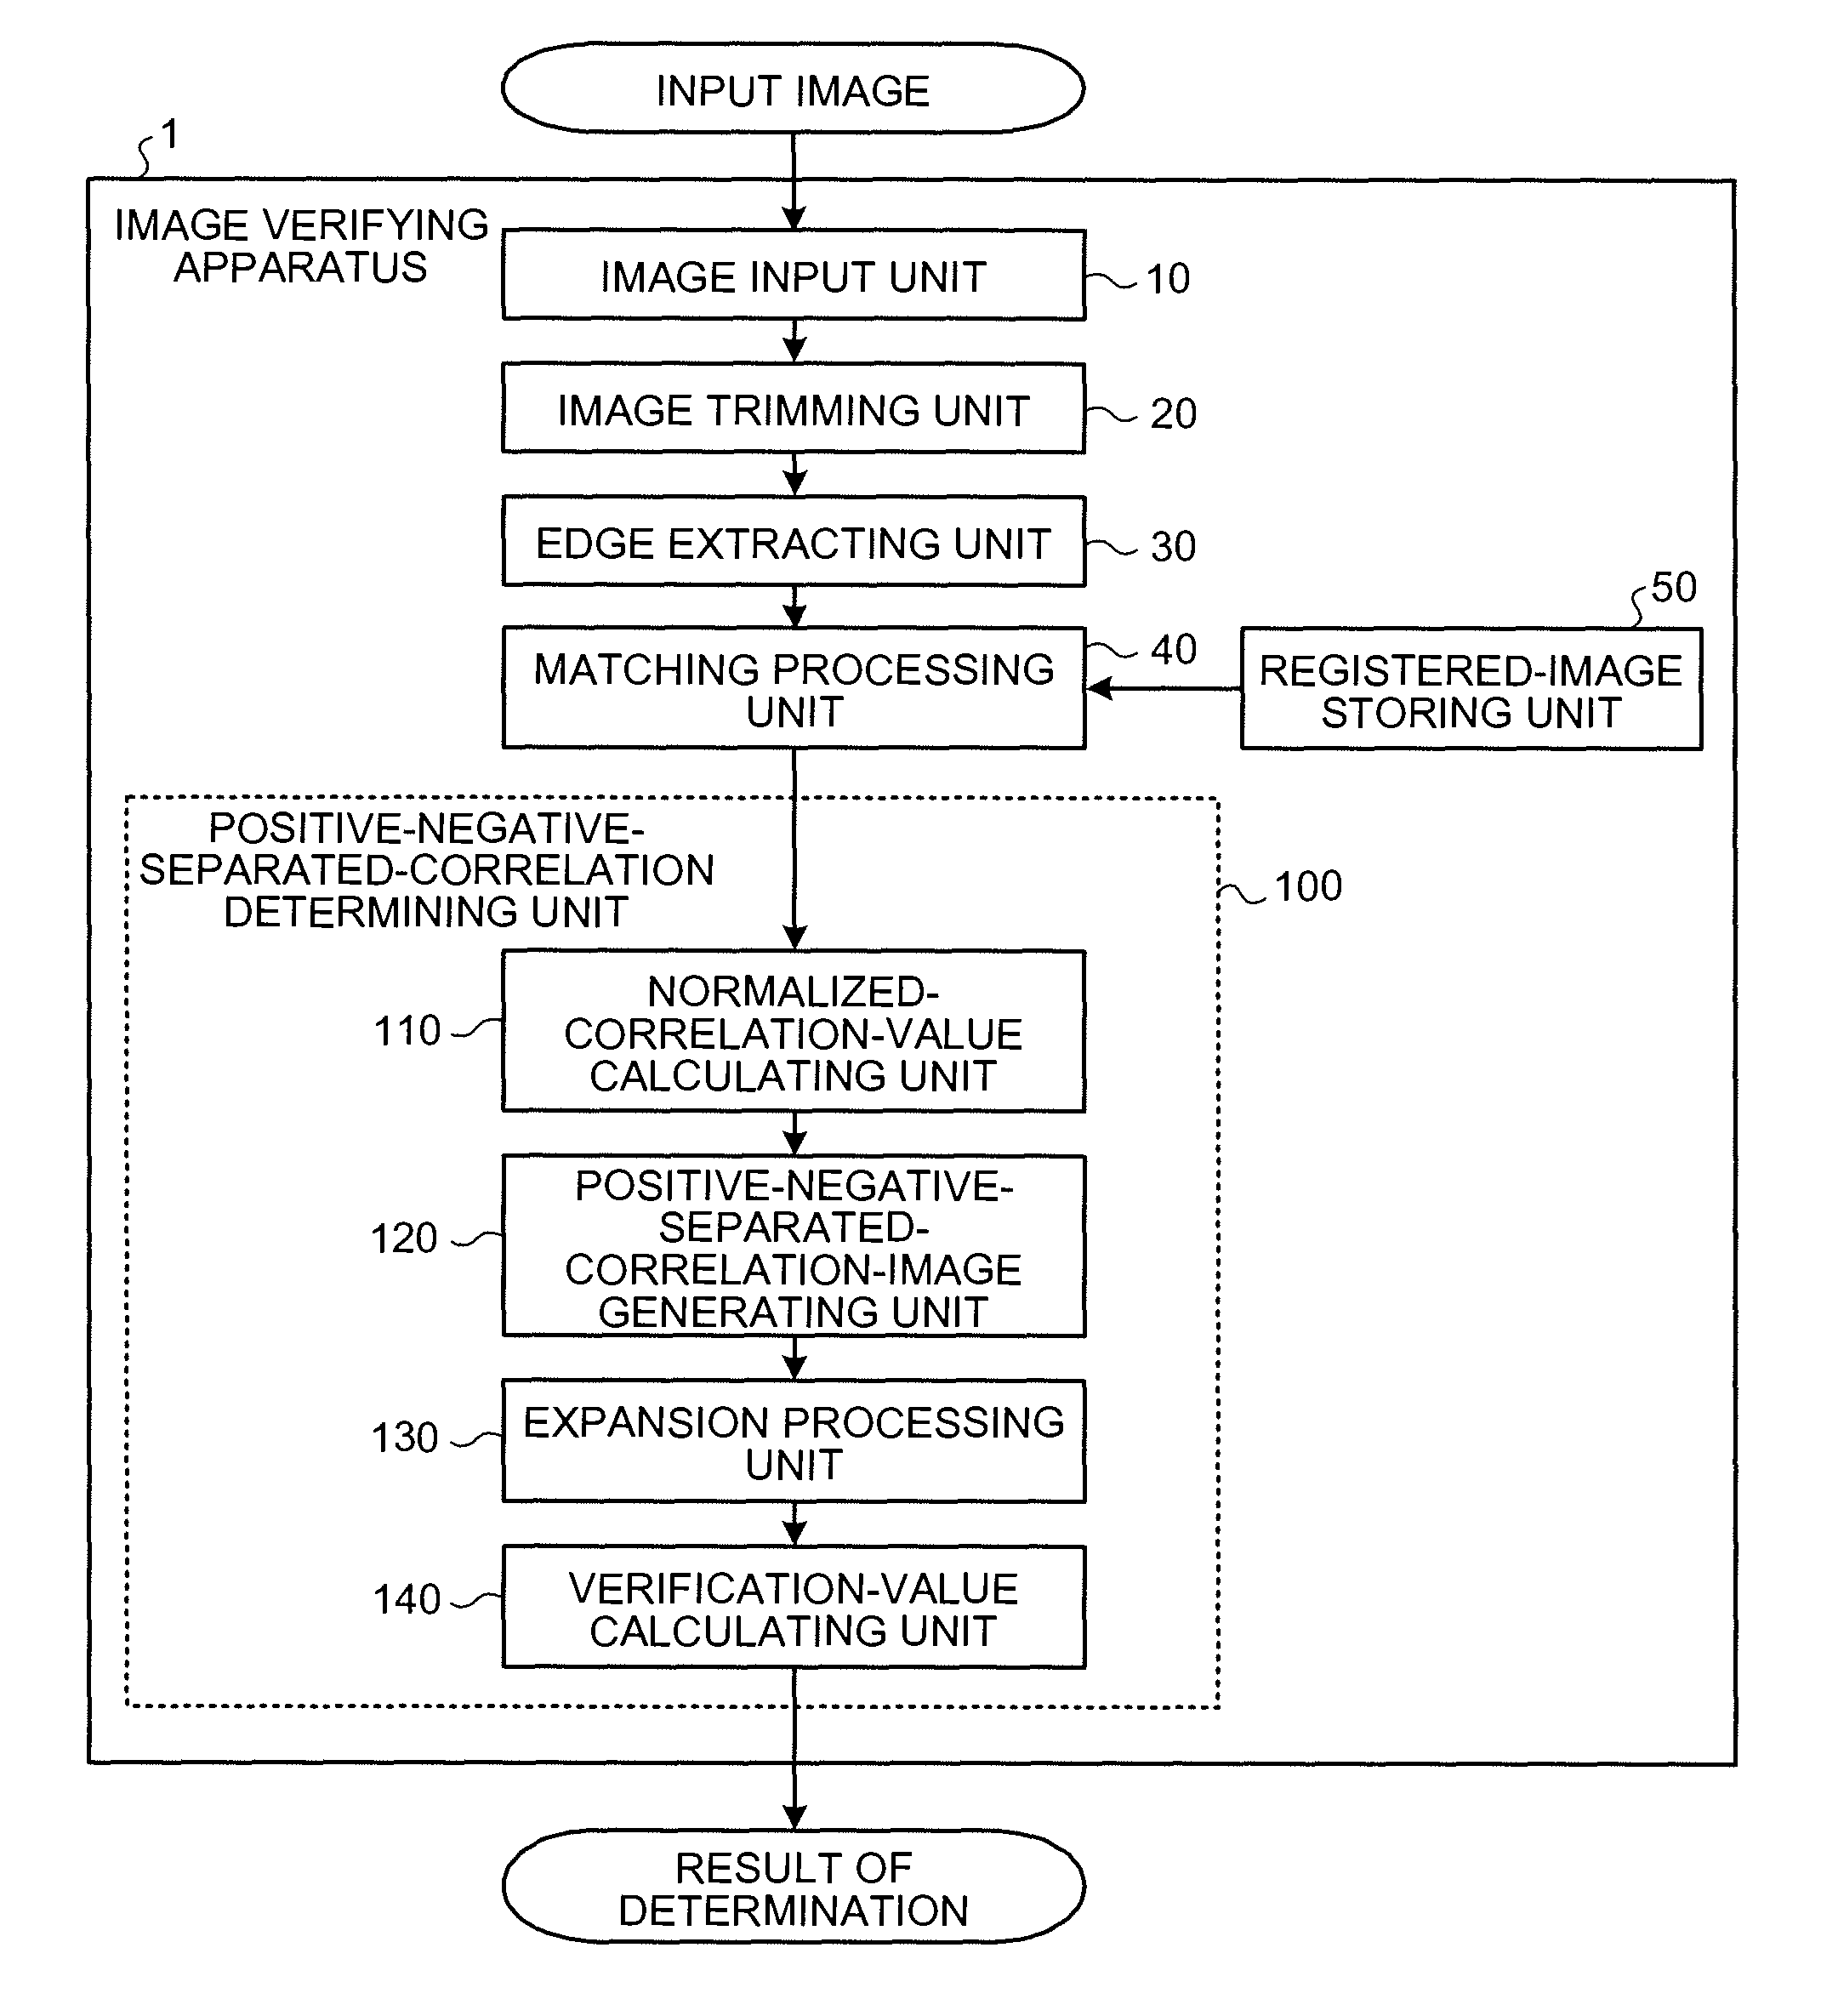 Apparatus and method for verifying image by comparison with template image